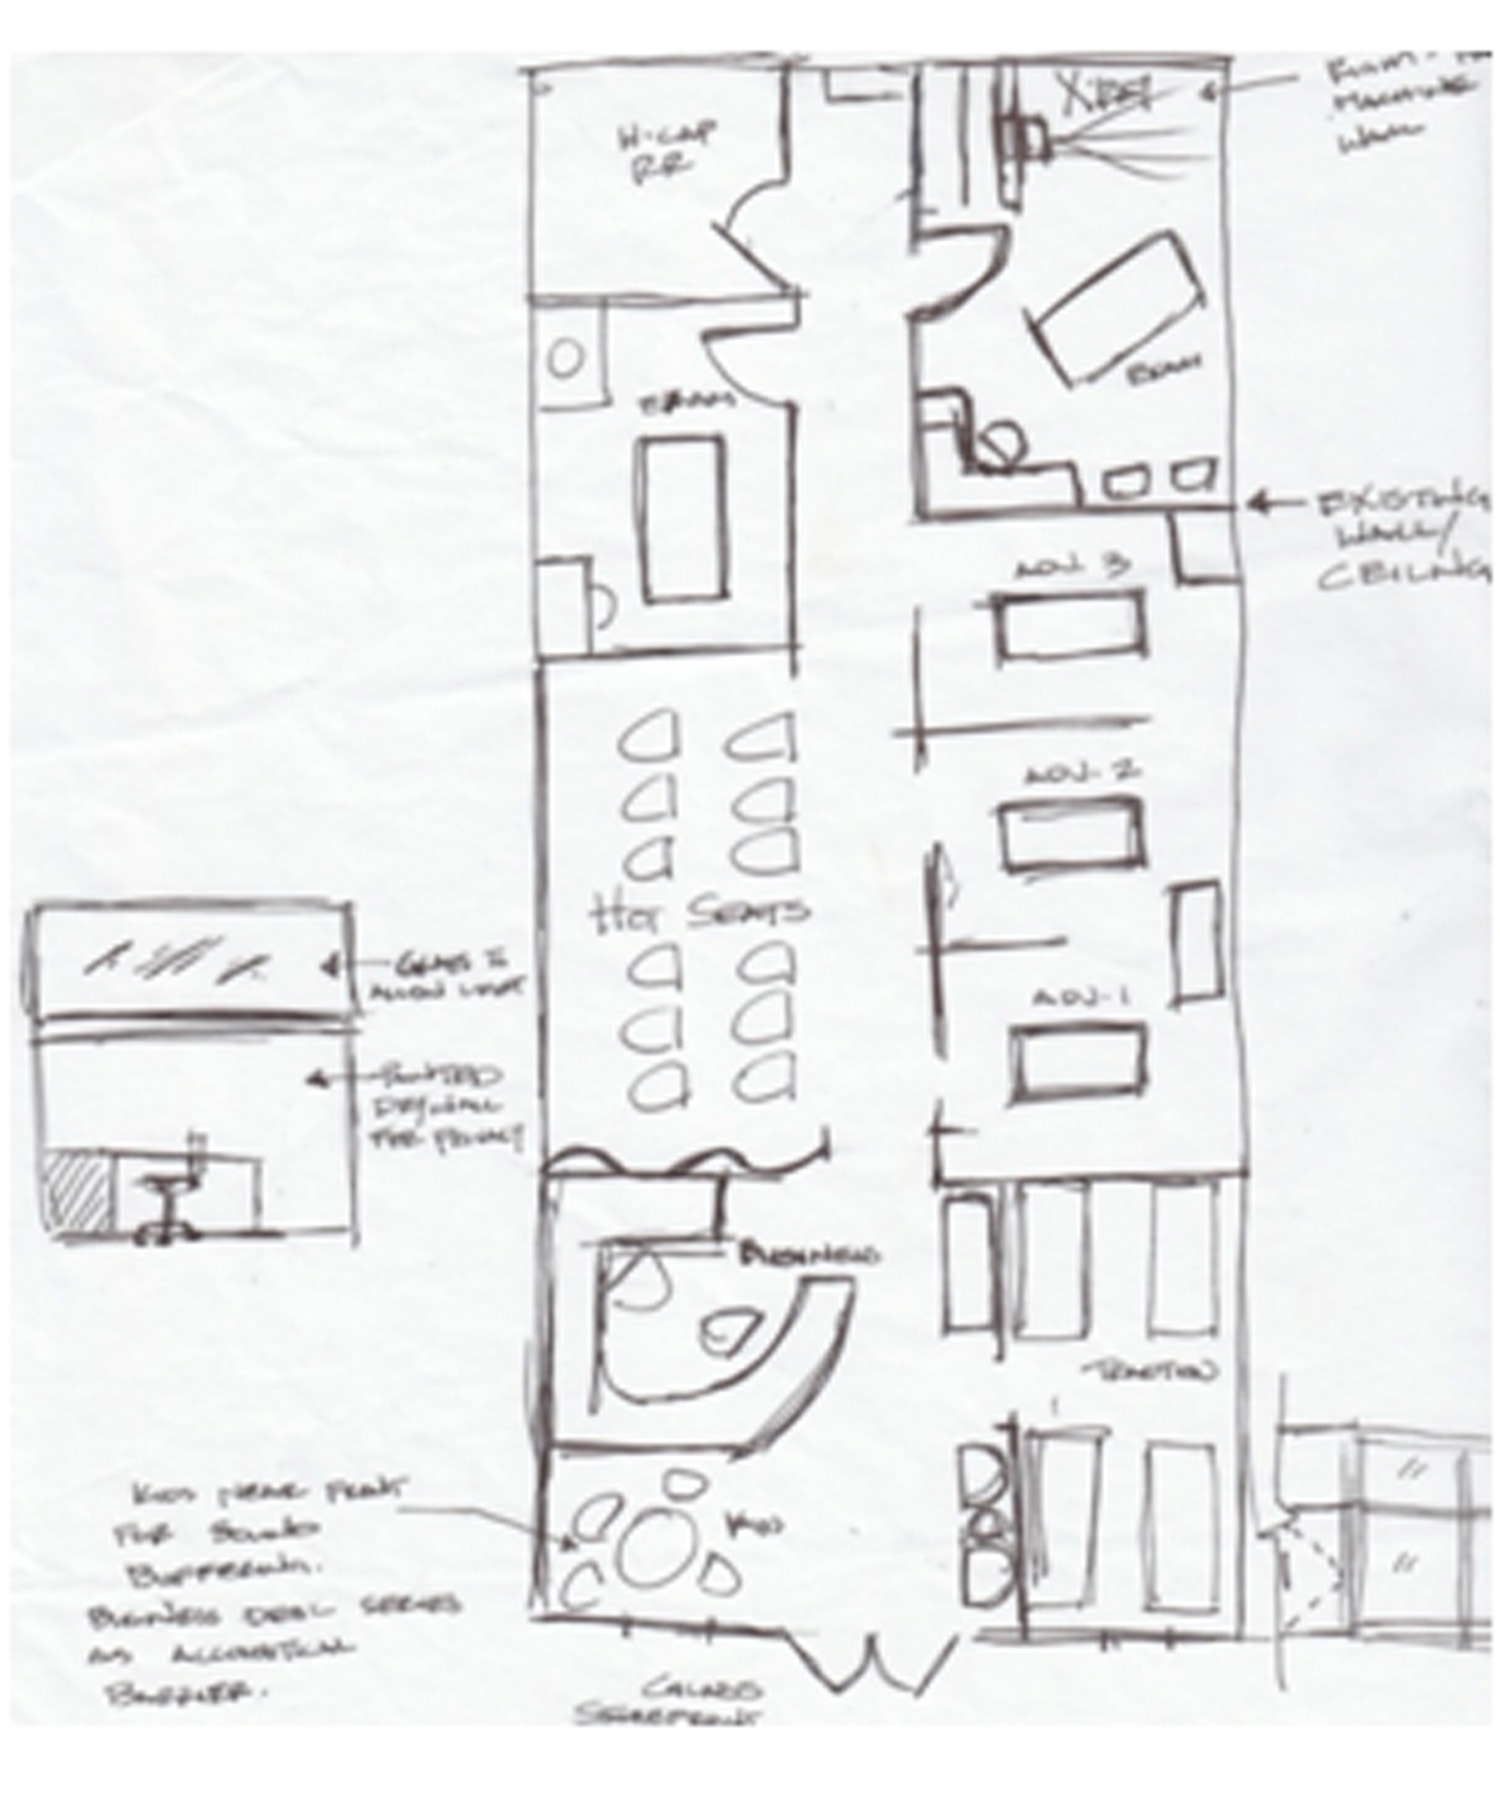 Blog-2.2-space-plan-sketch-chiropractic-clinic-architecture